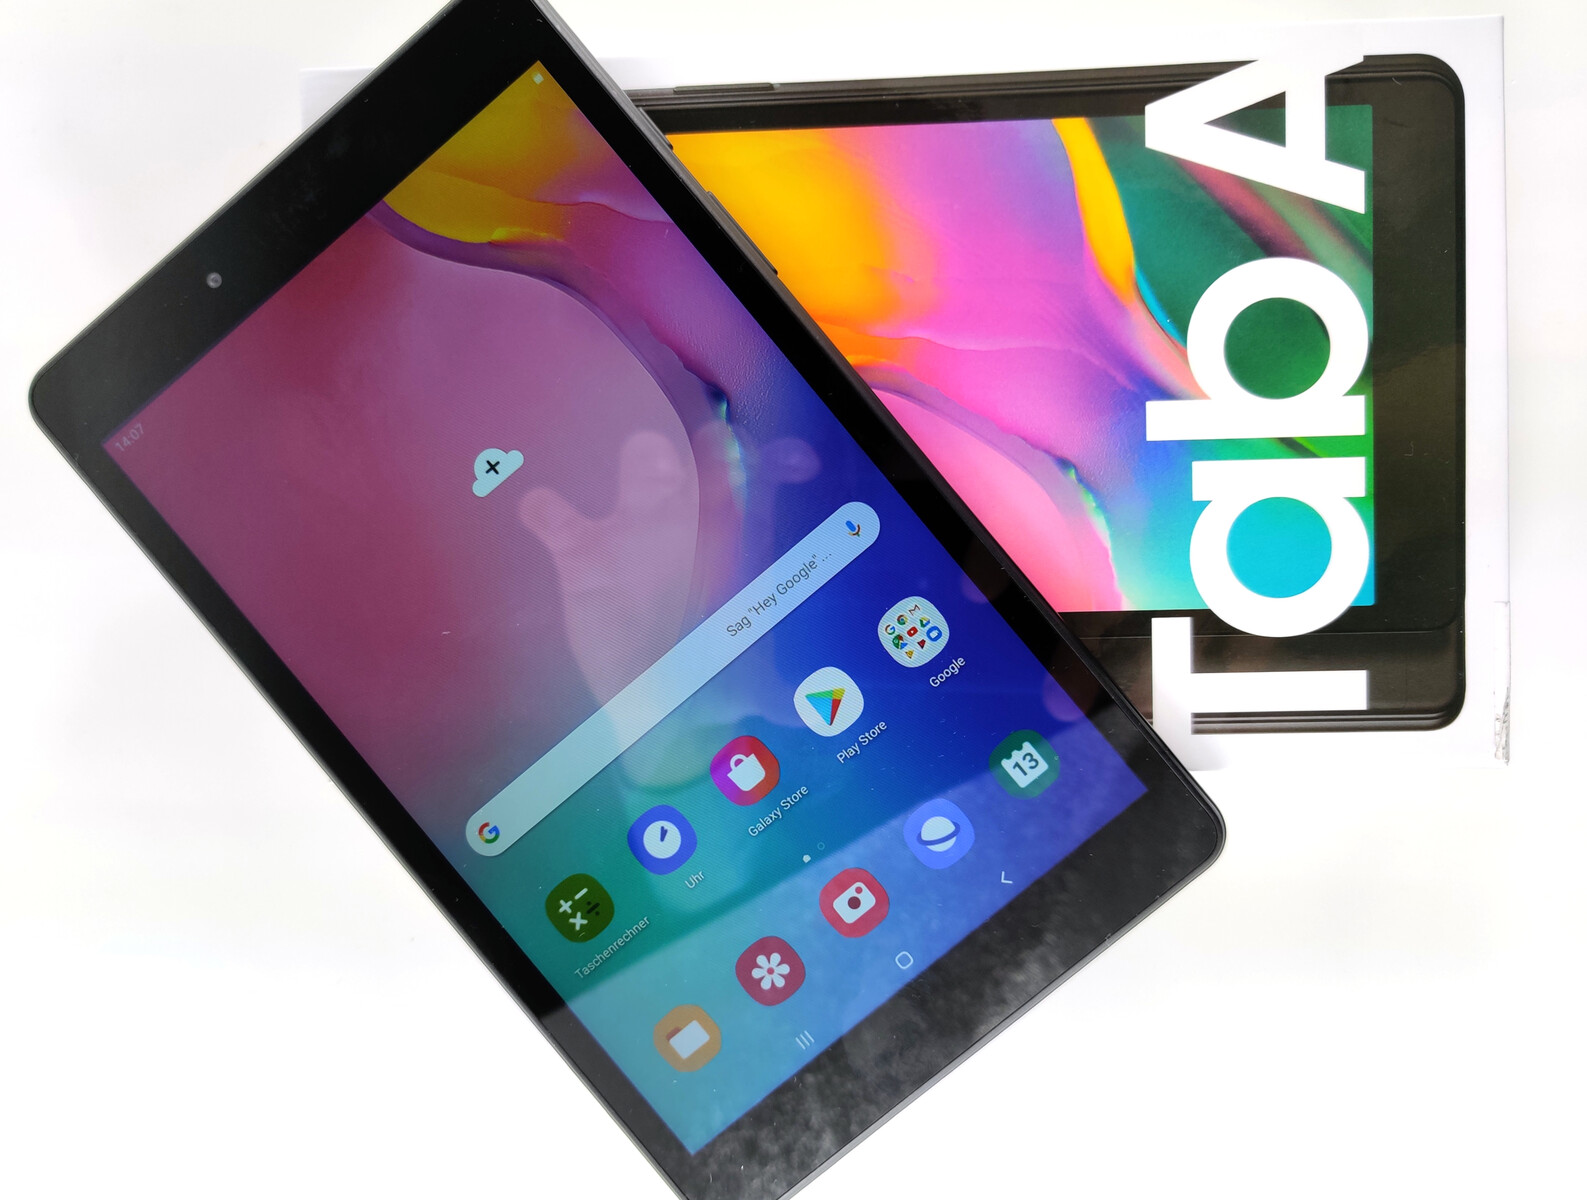 Review - Samsung Galaxy Tab A 8.0 (2019): The RM599 tablet